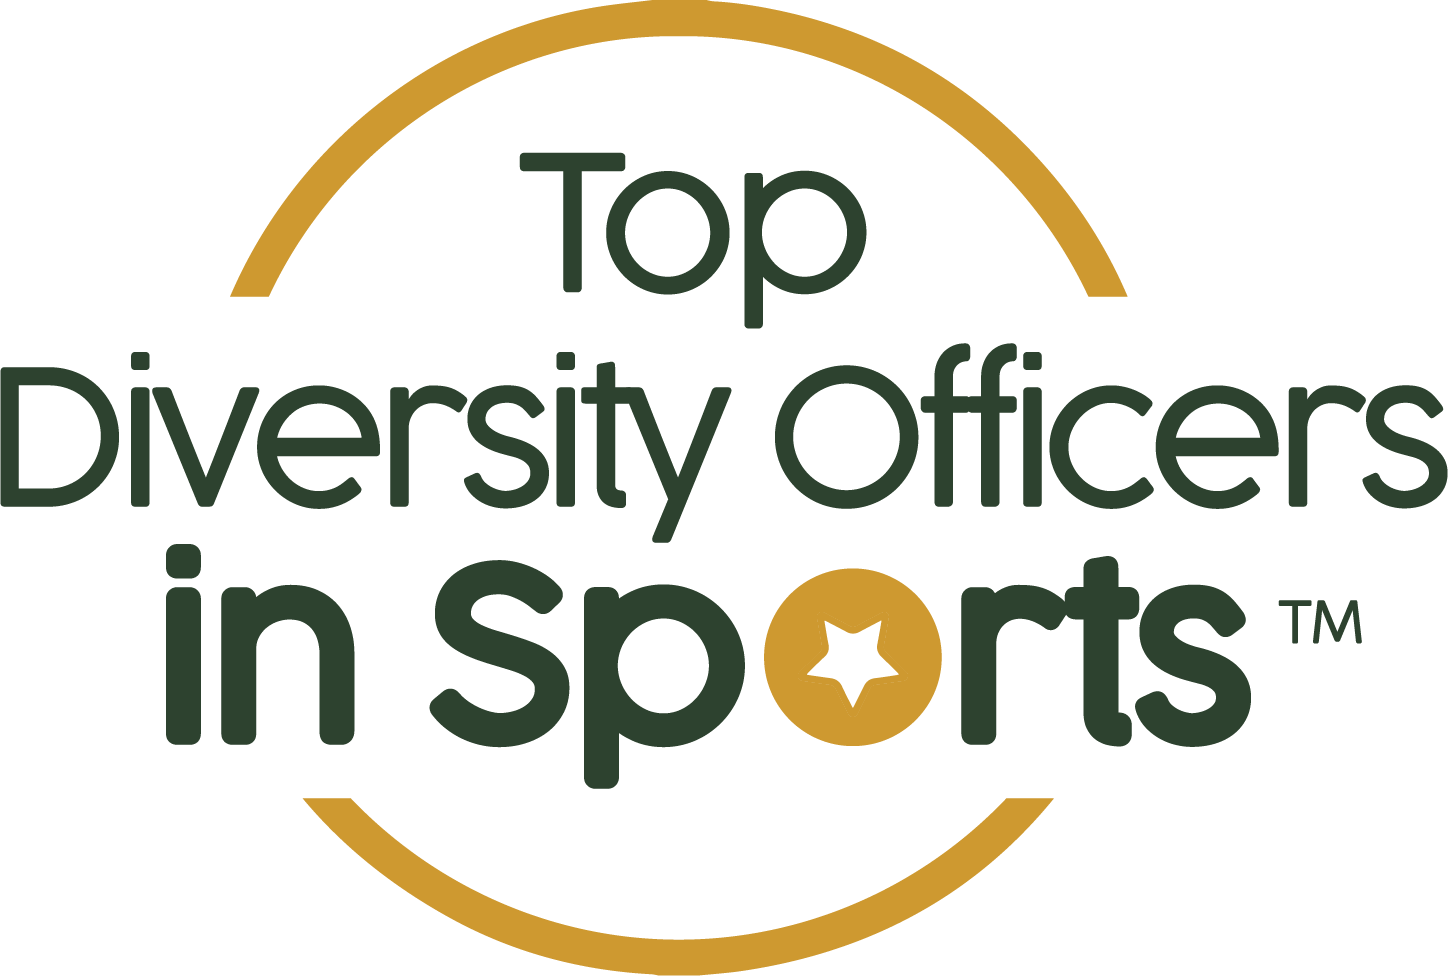 Top Diversity Officers in Sports